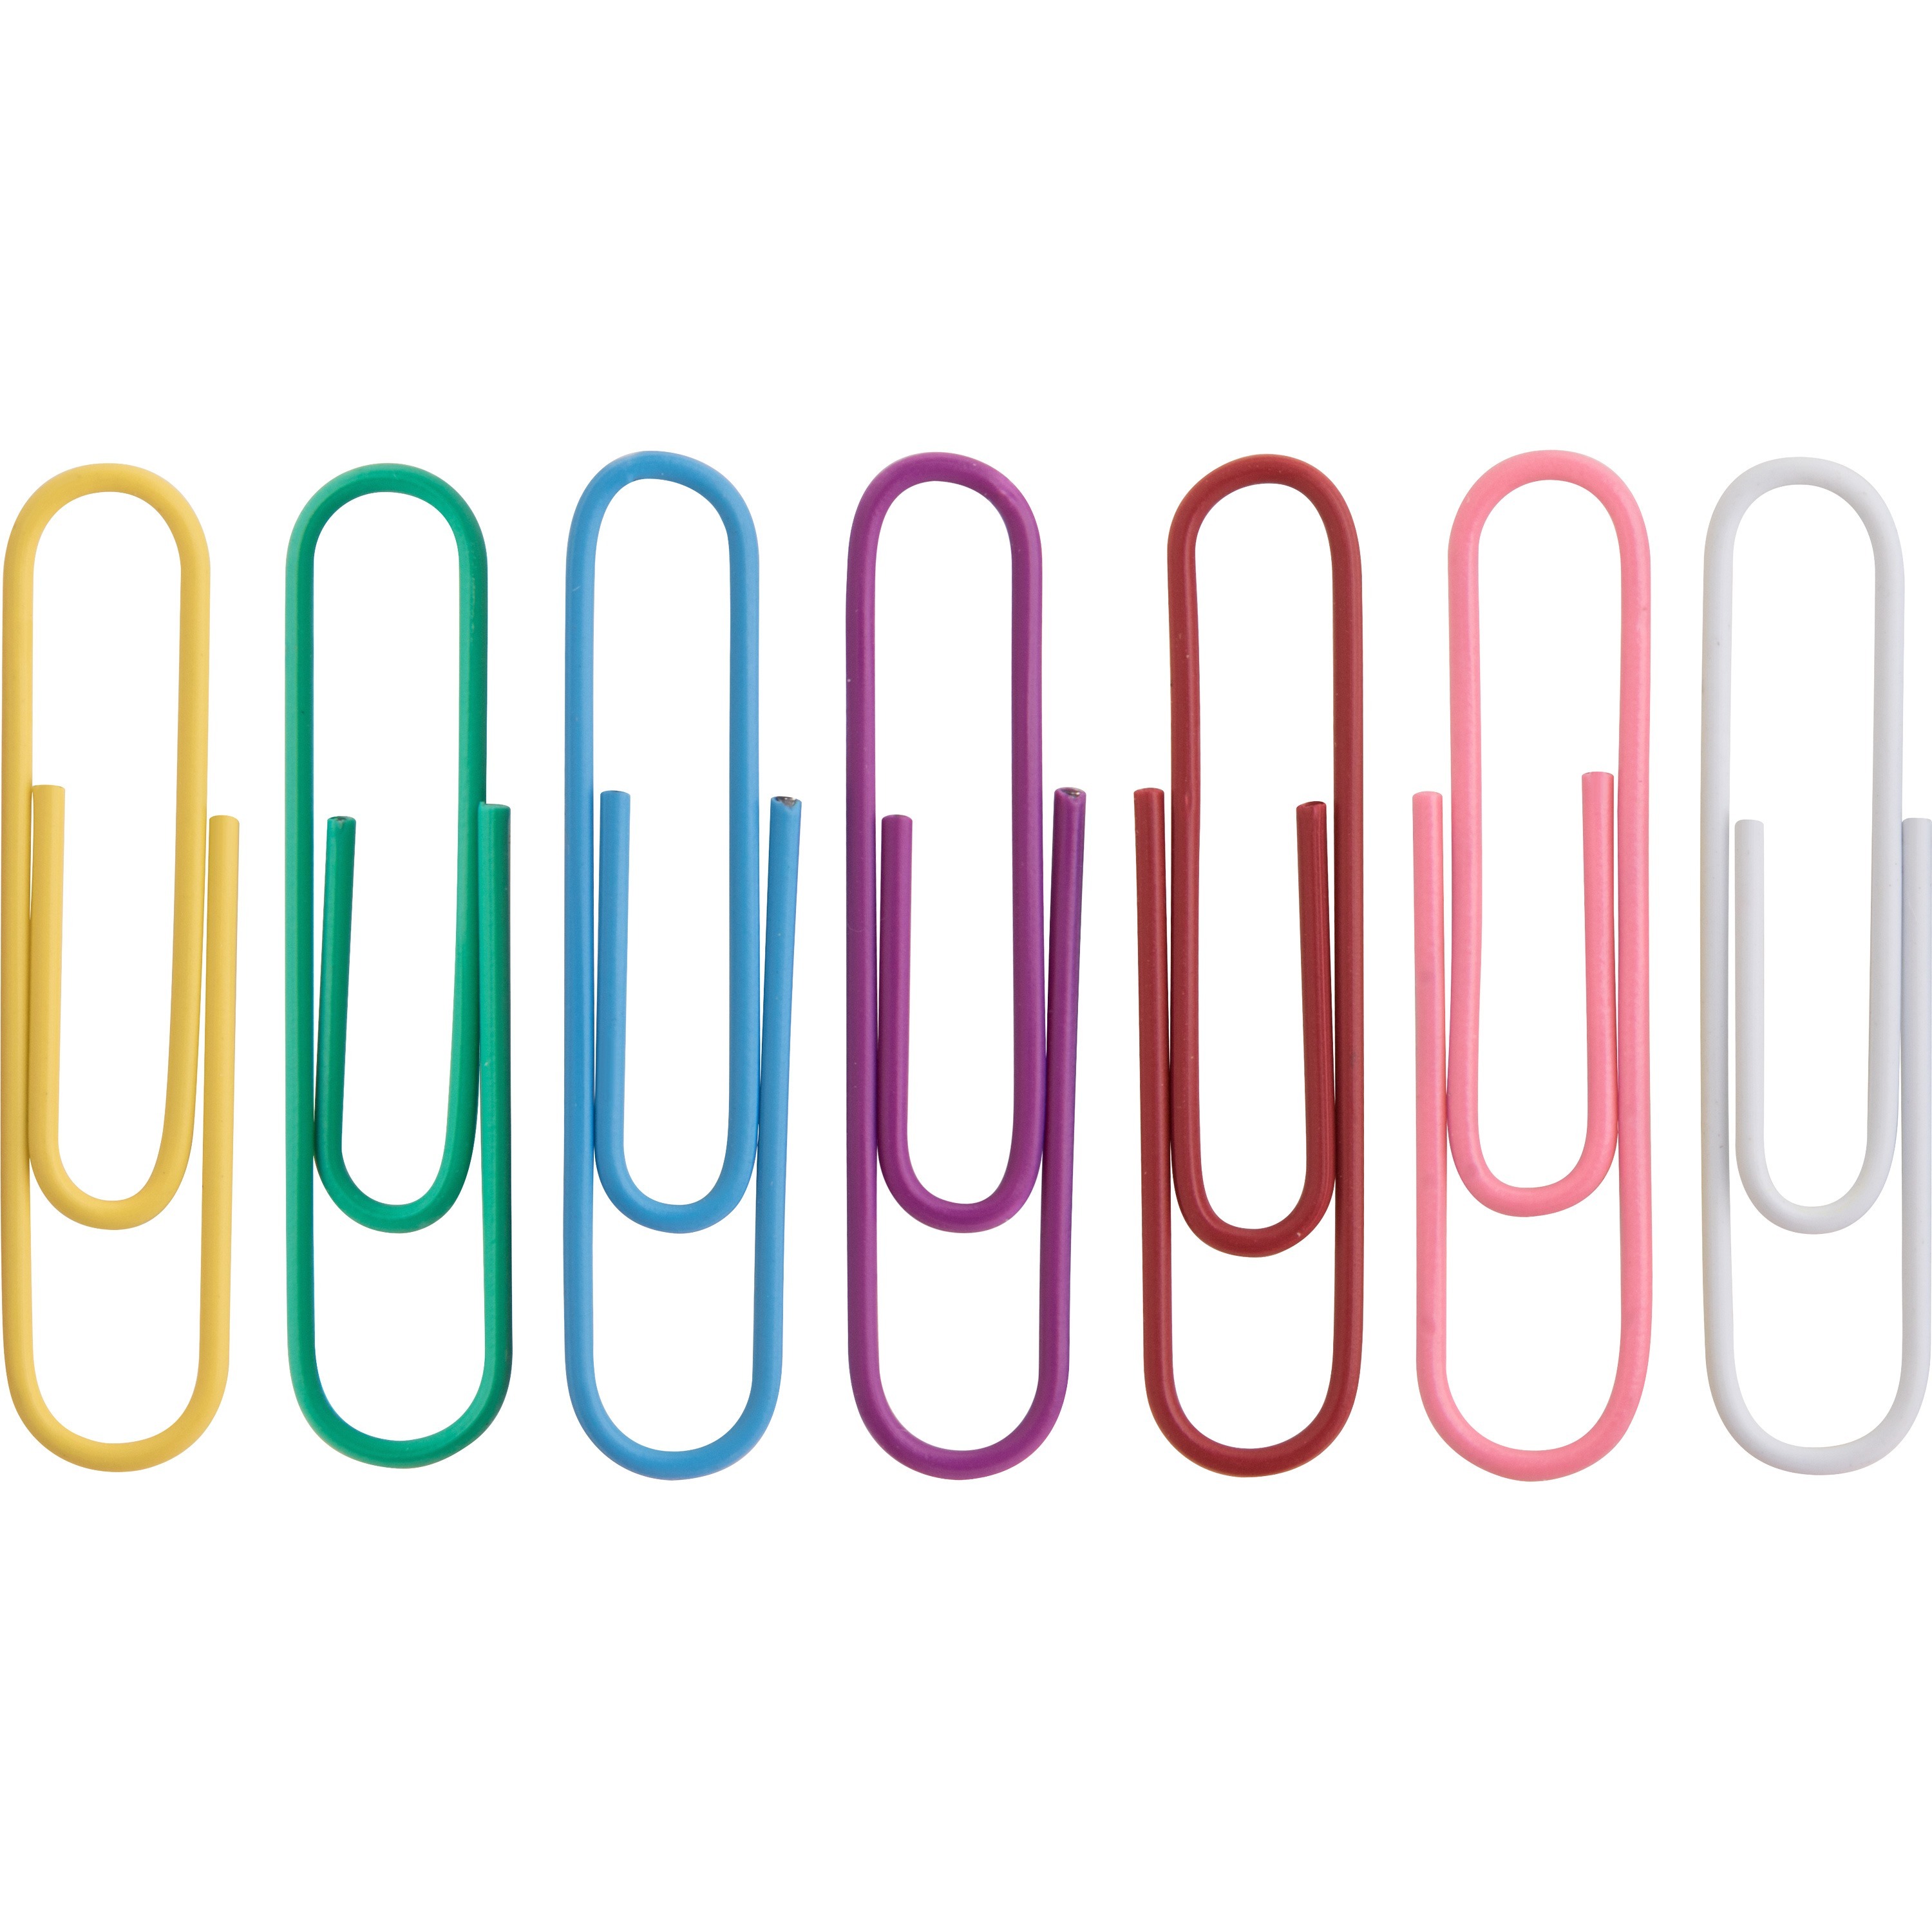 Business Source Vinyl-coated Gem Paper Clips - Jumbo Size 250/pack